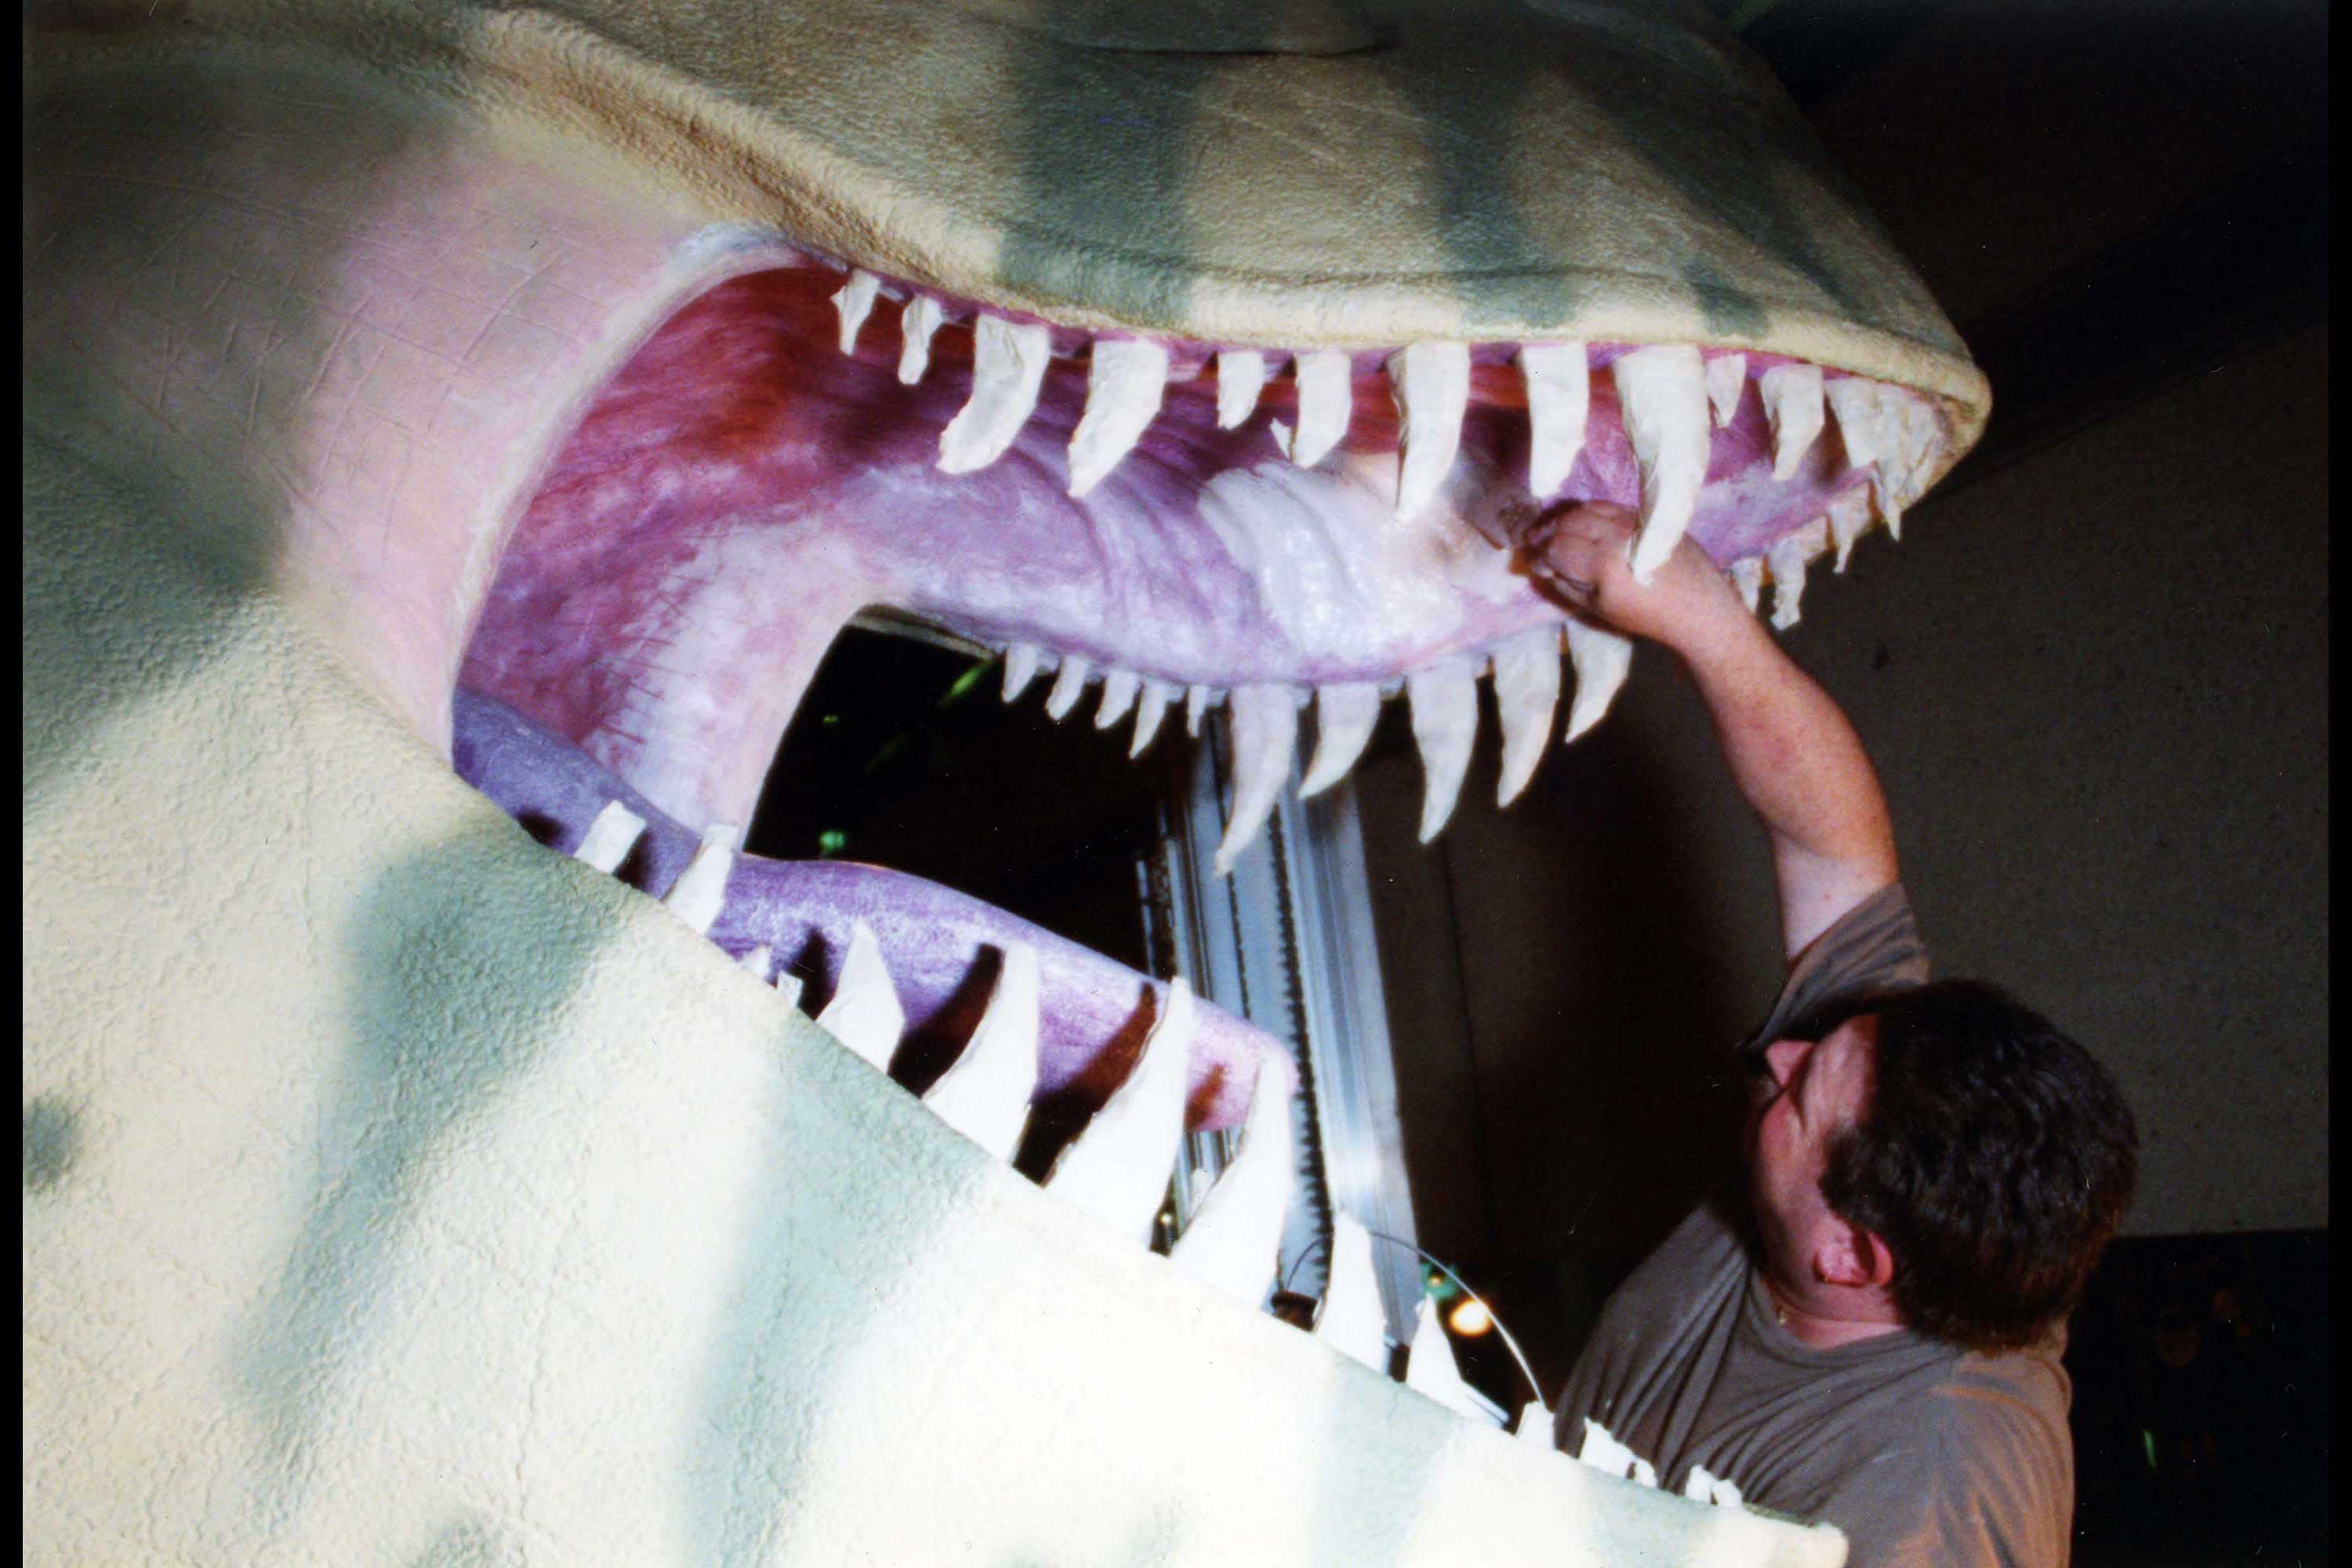 Current Model T.rex Teeth. This is a photograph of someone painting the teeth and mouth of the model T. Rex.